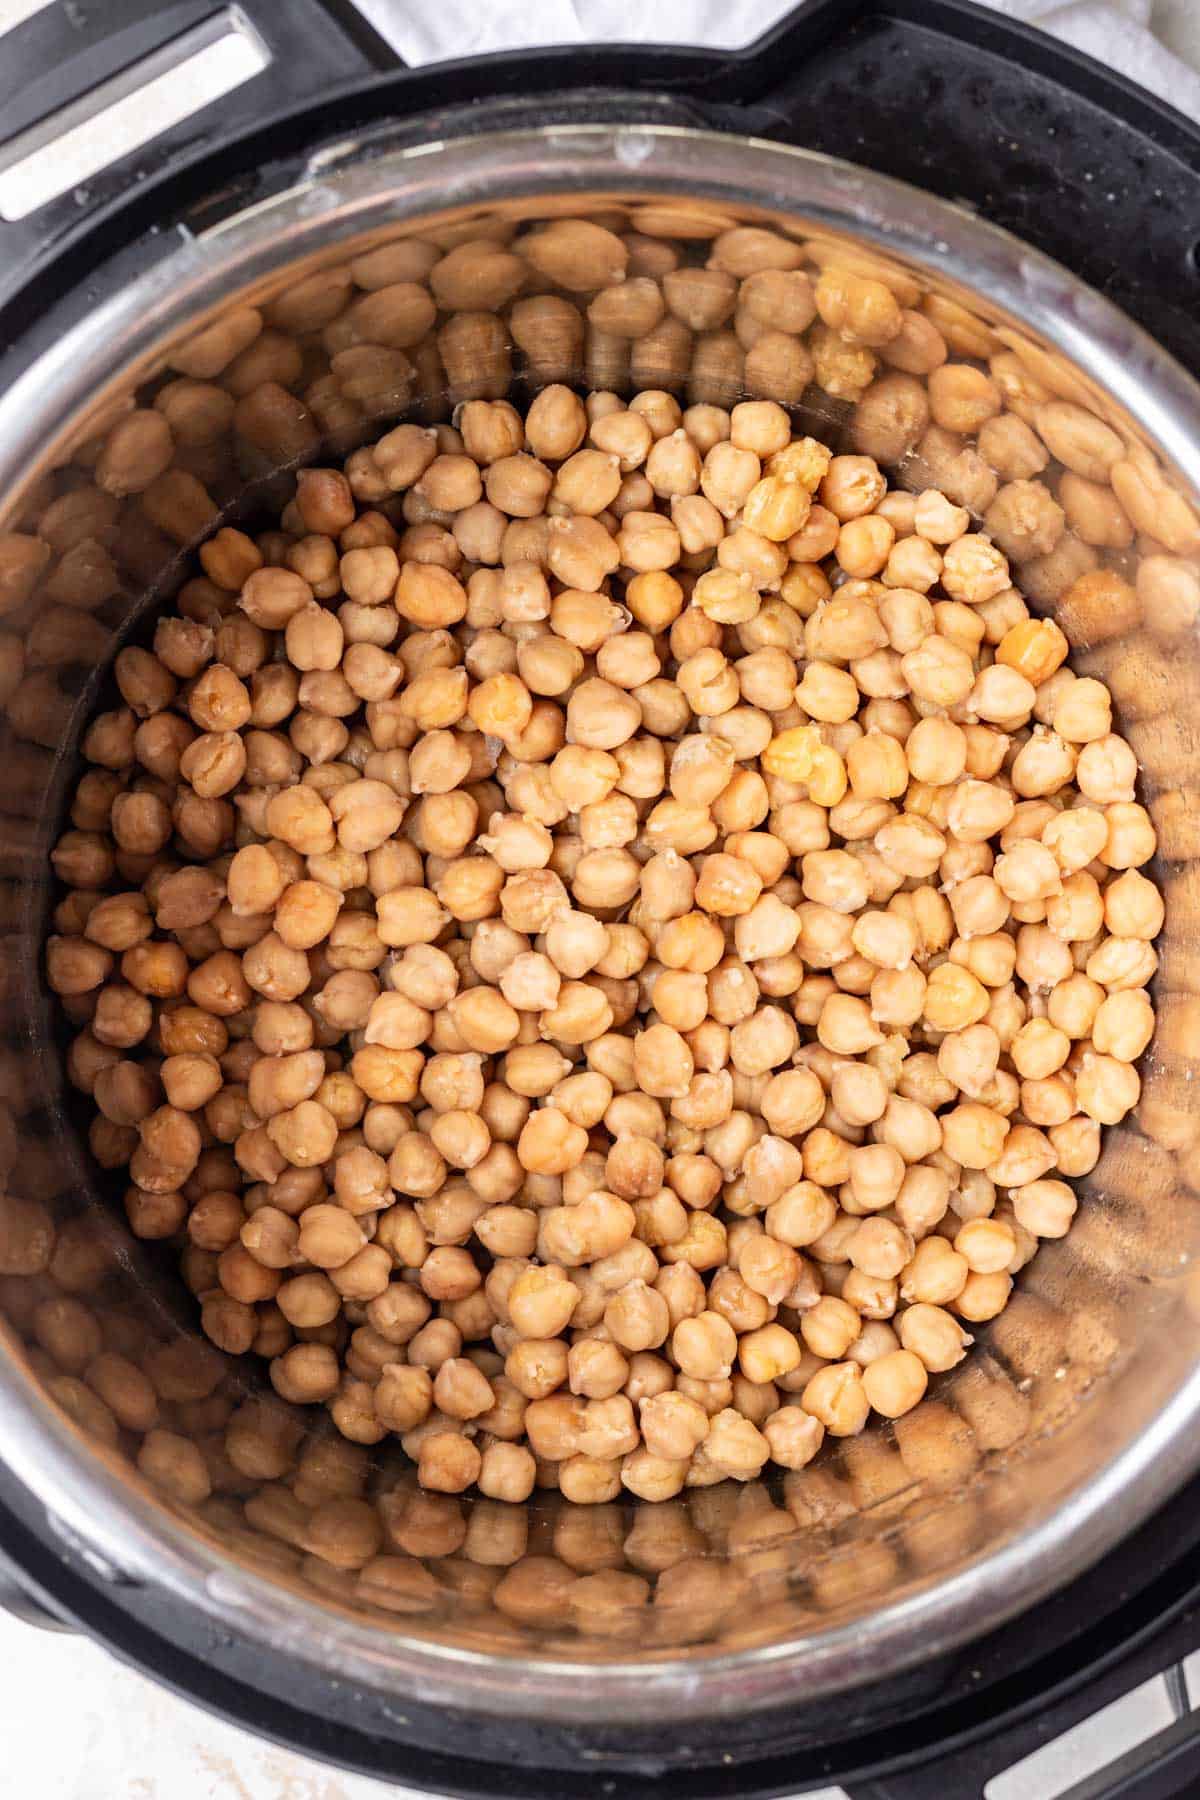 Chickpeas in the bottom of the Instant Pot after pressure cooking.